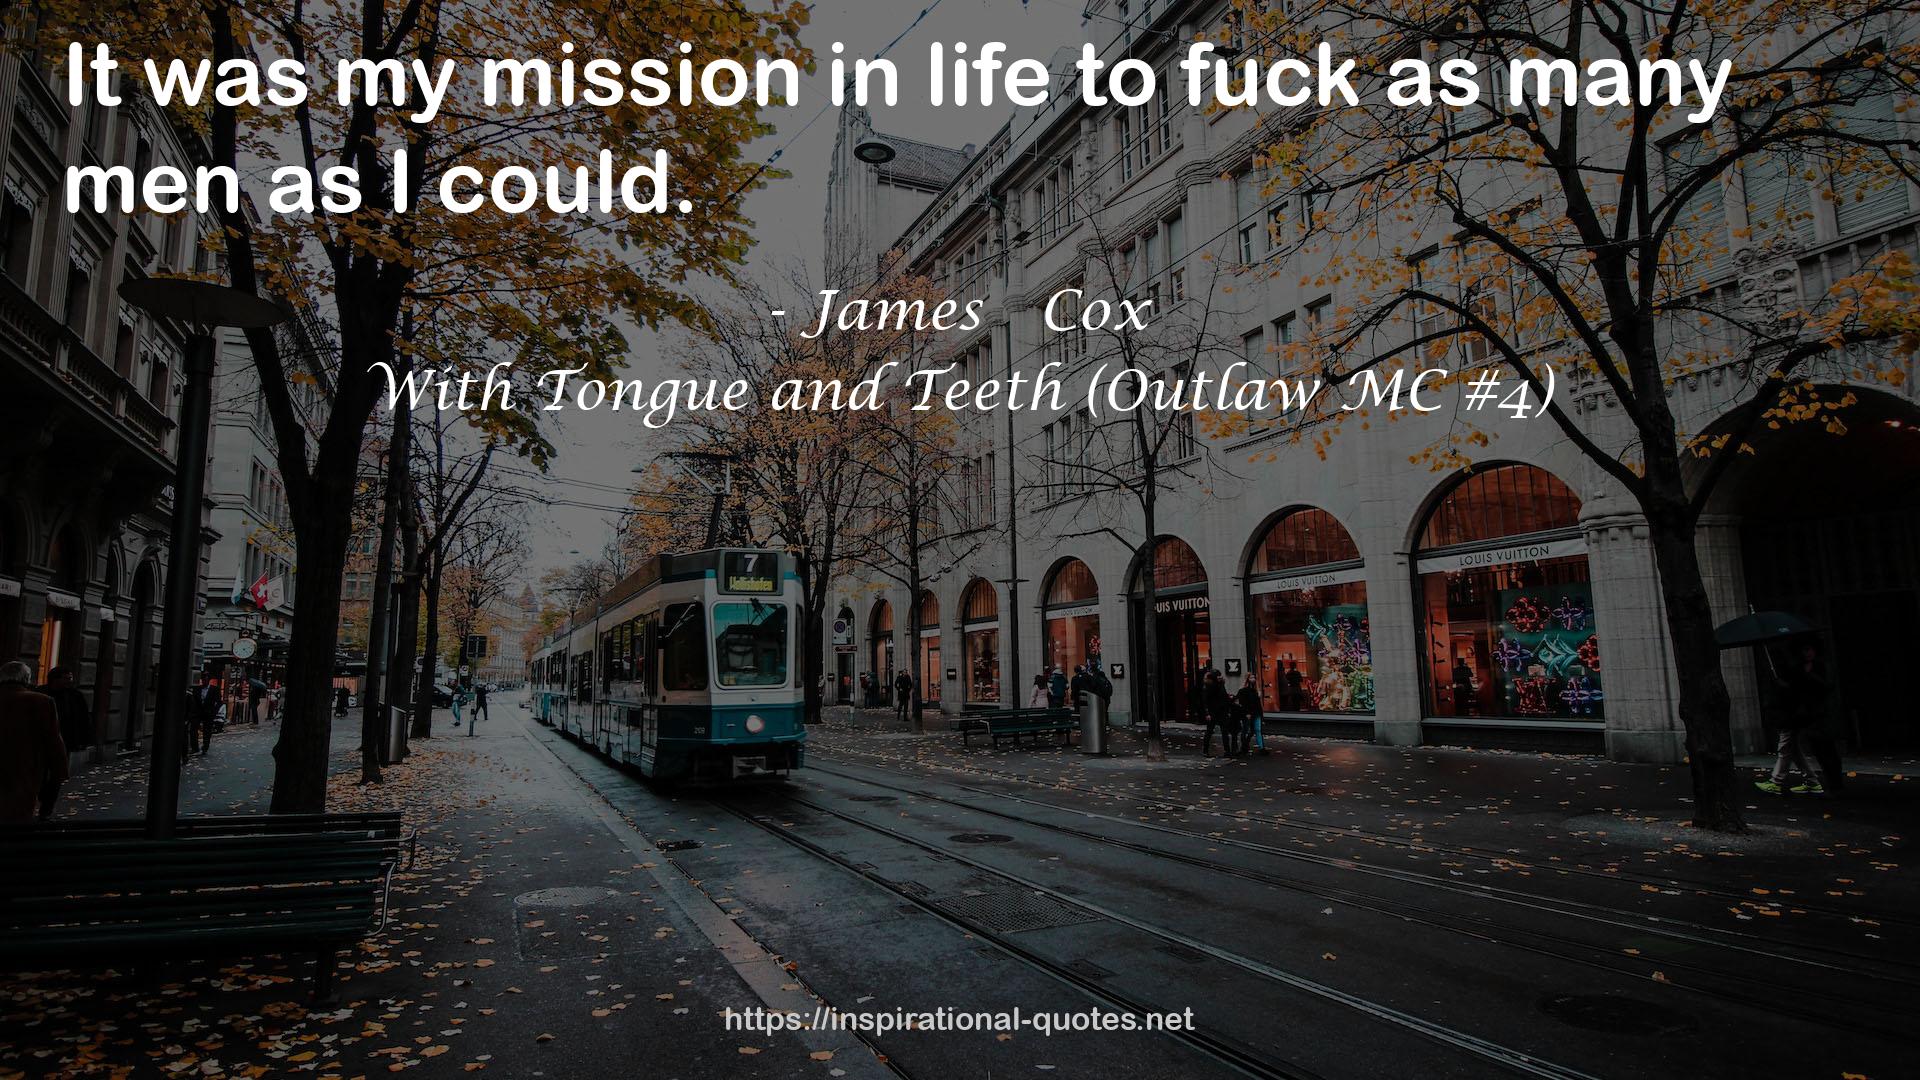 With Tongue and Teeth (Outlaw MC #4) QUOTES